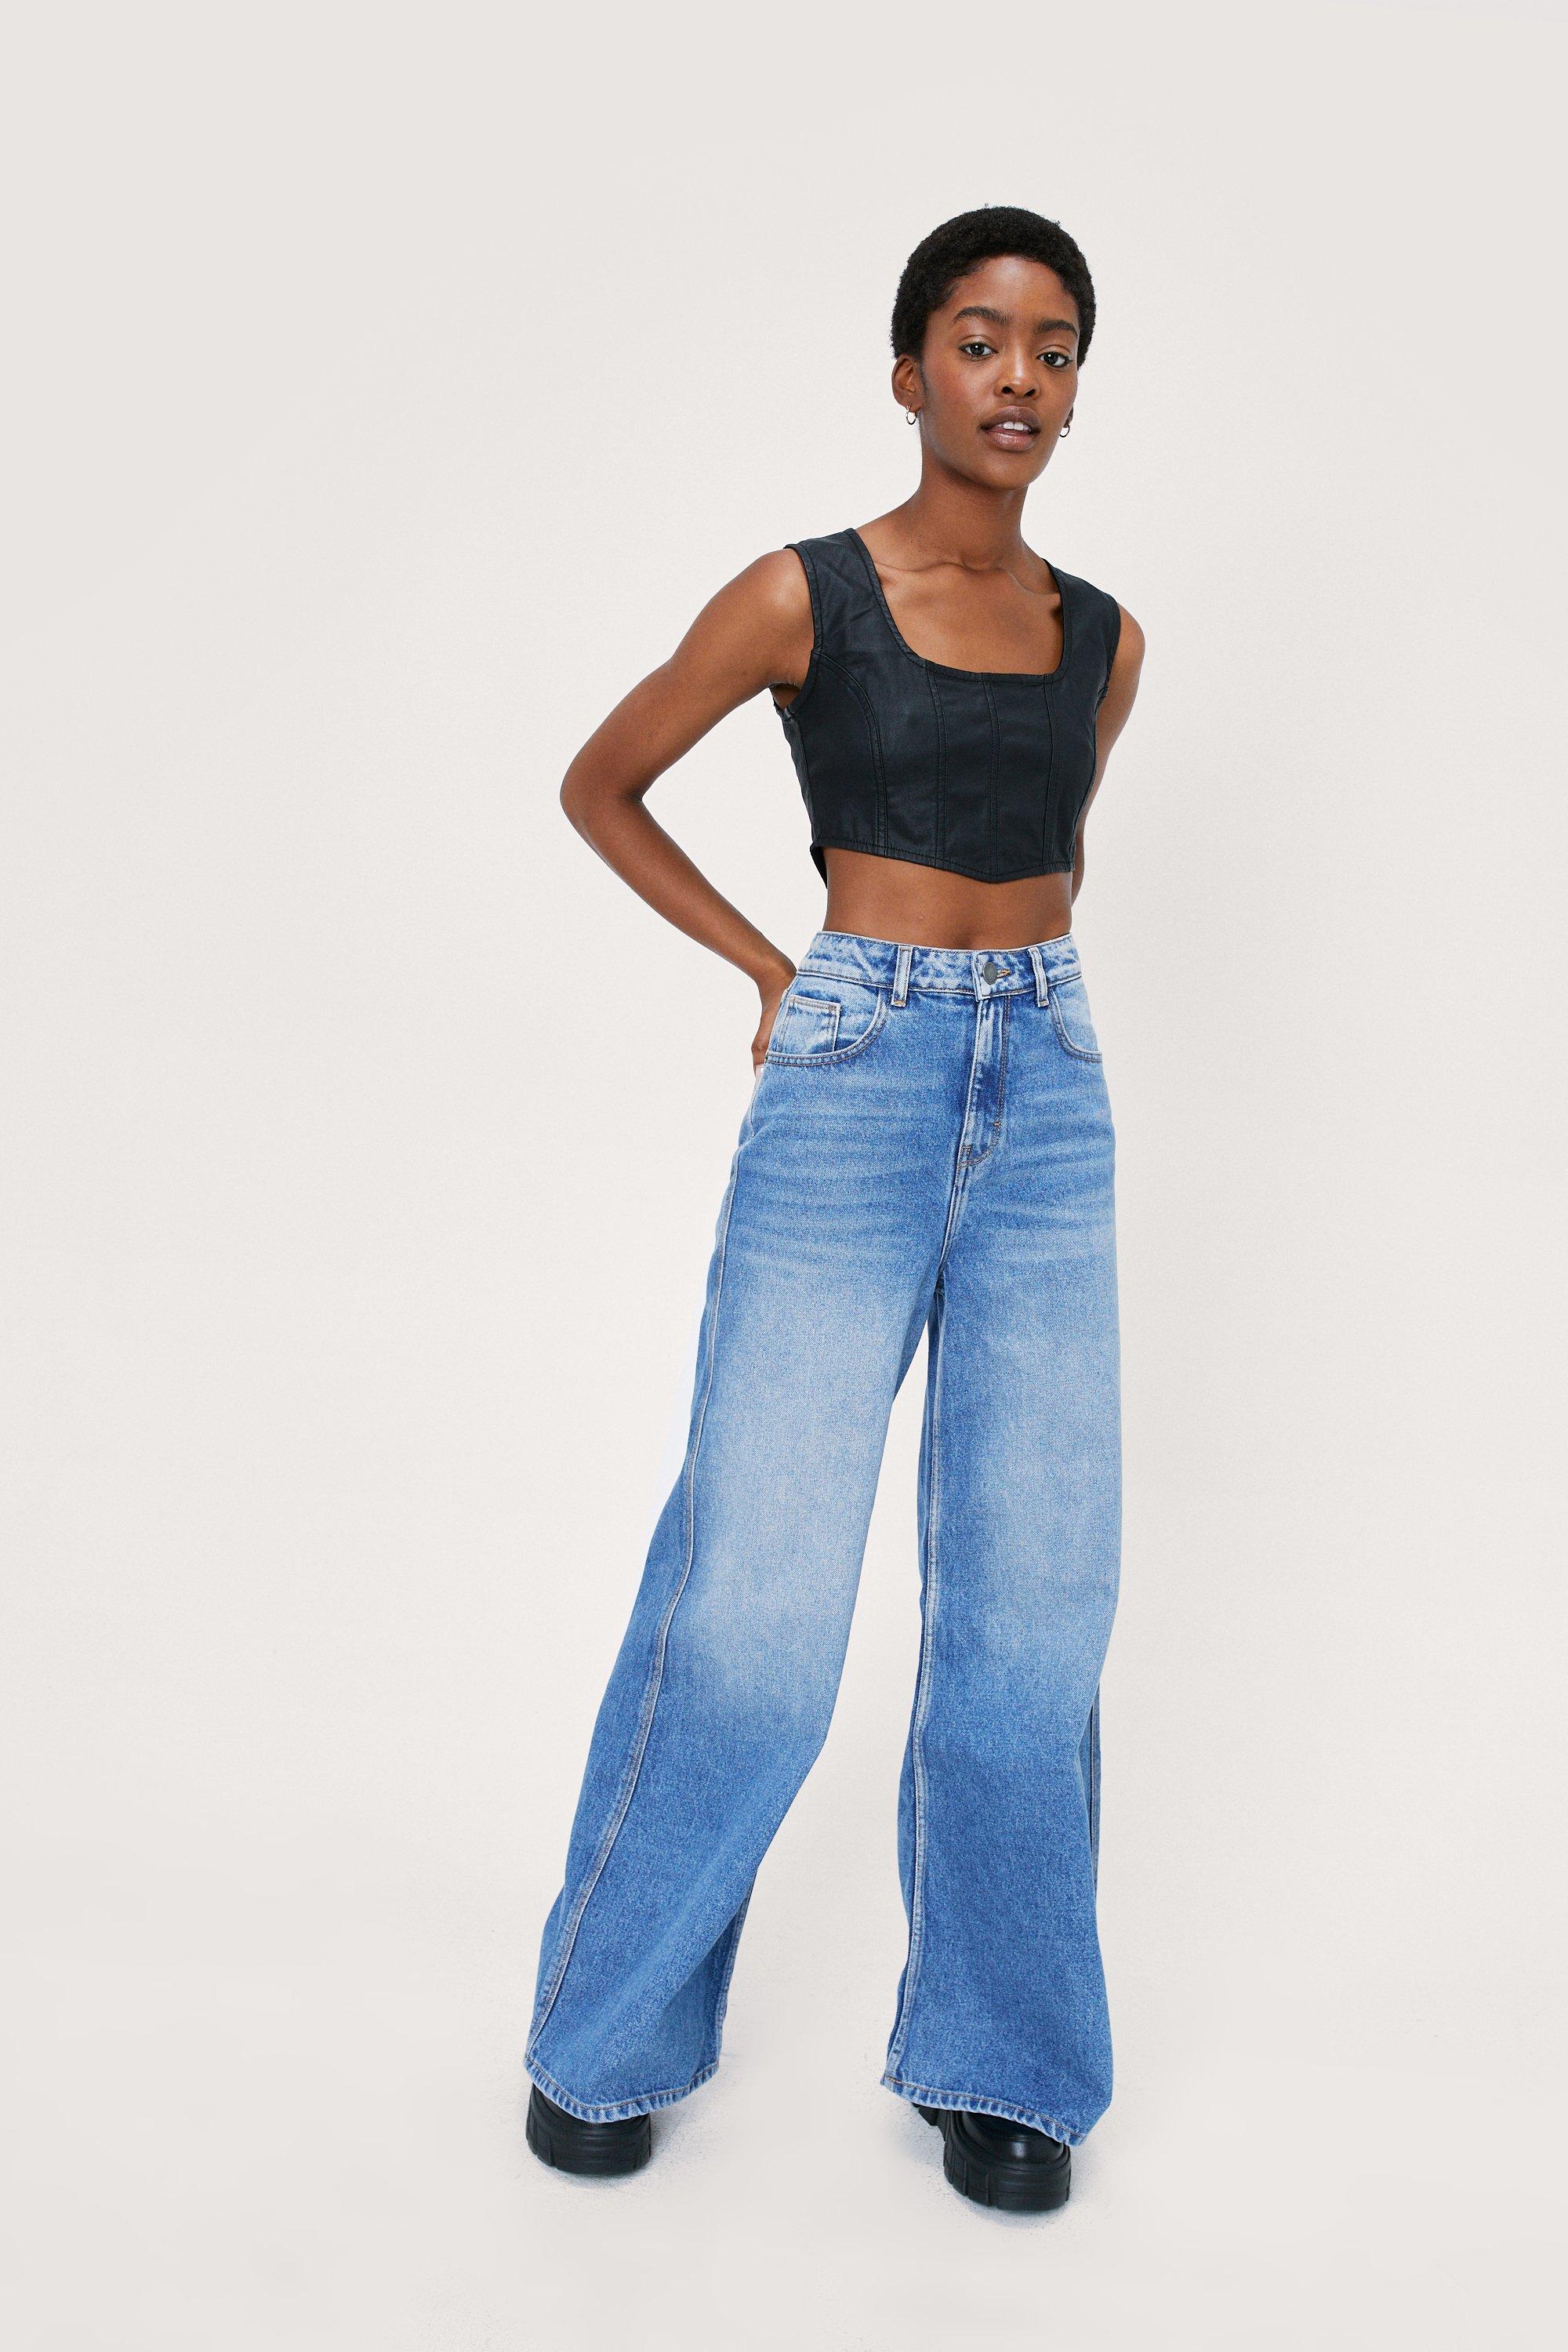 Recycled Coated Denim Seamed Corset Top